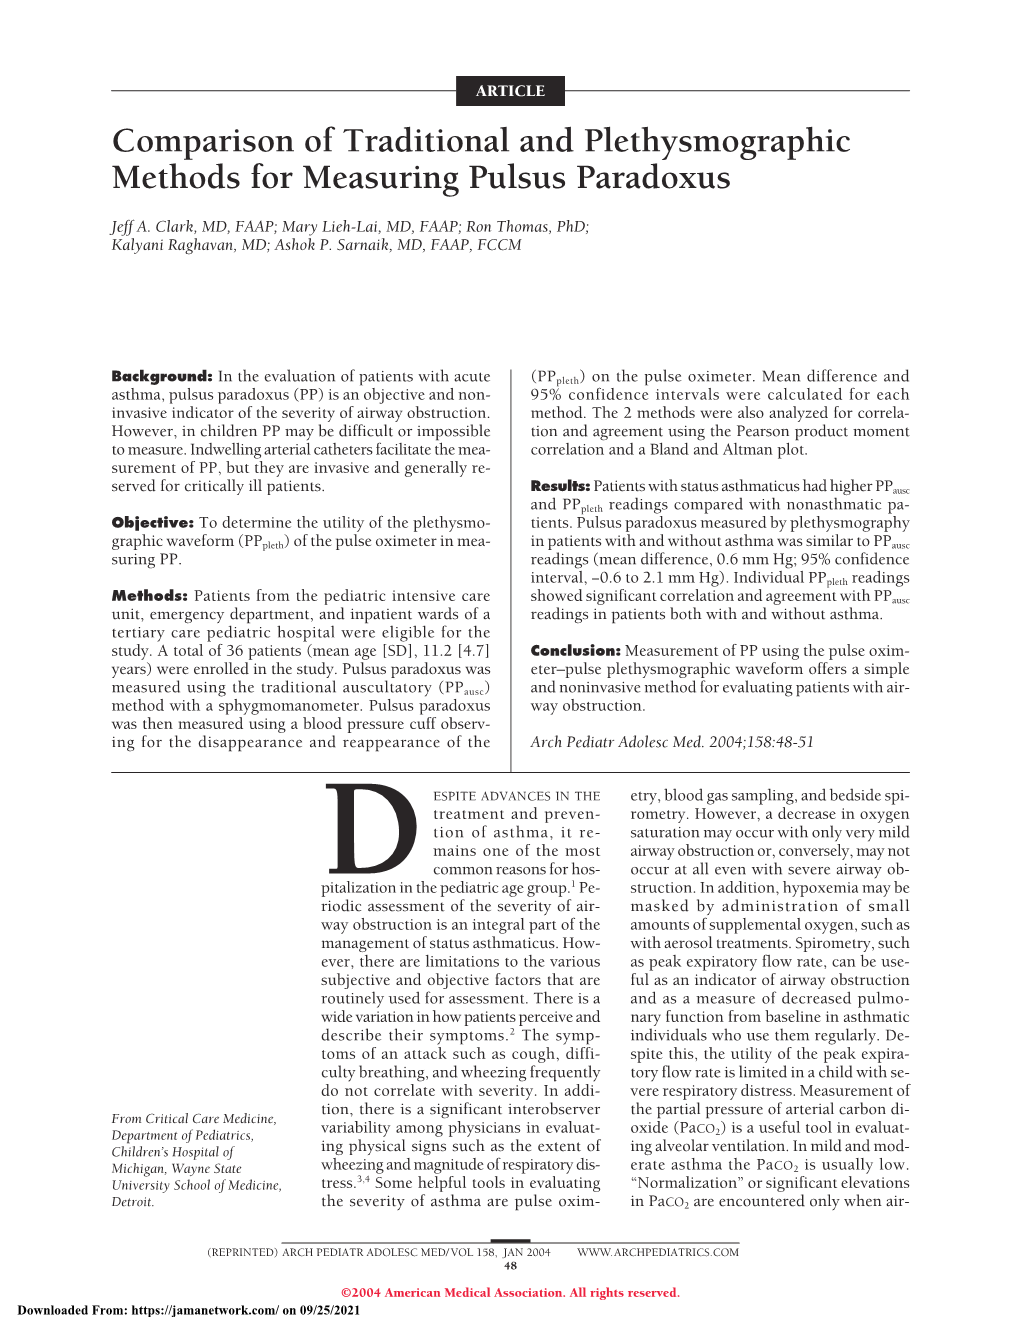 Comparison of Traditional and Plethysmographic Methods for Measuring Pulsus Paradoxus